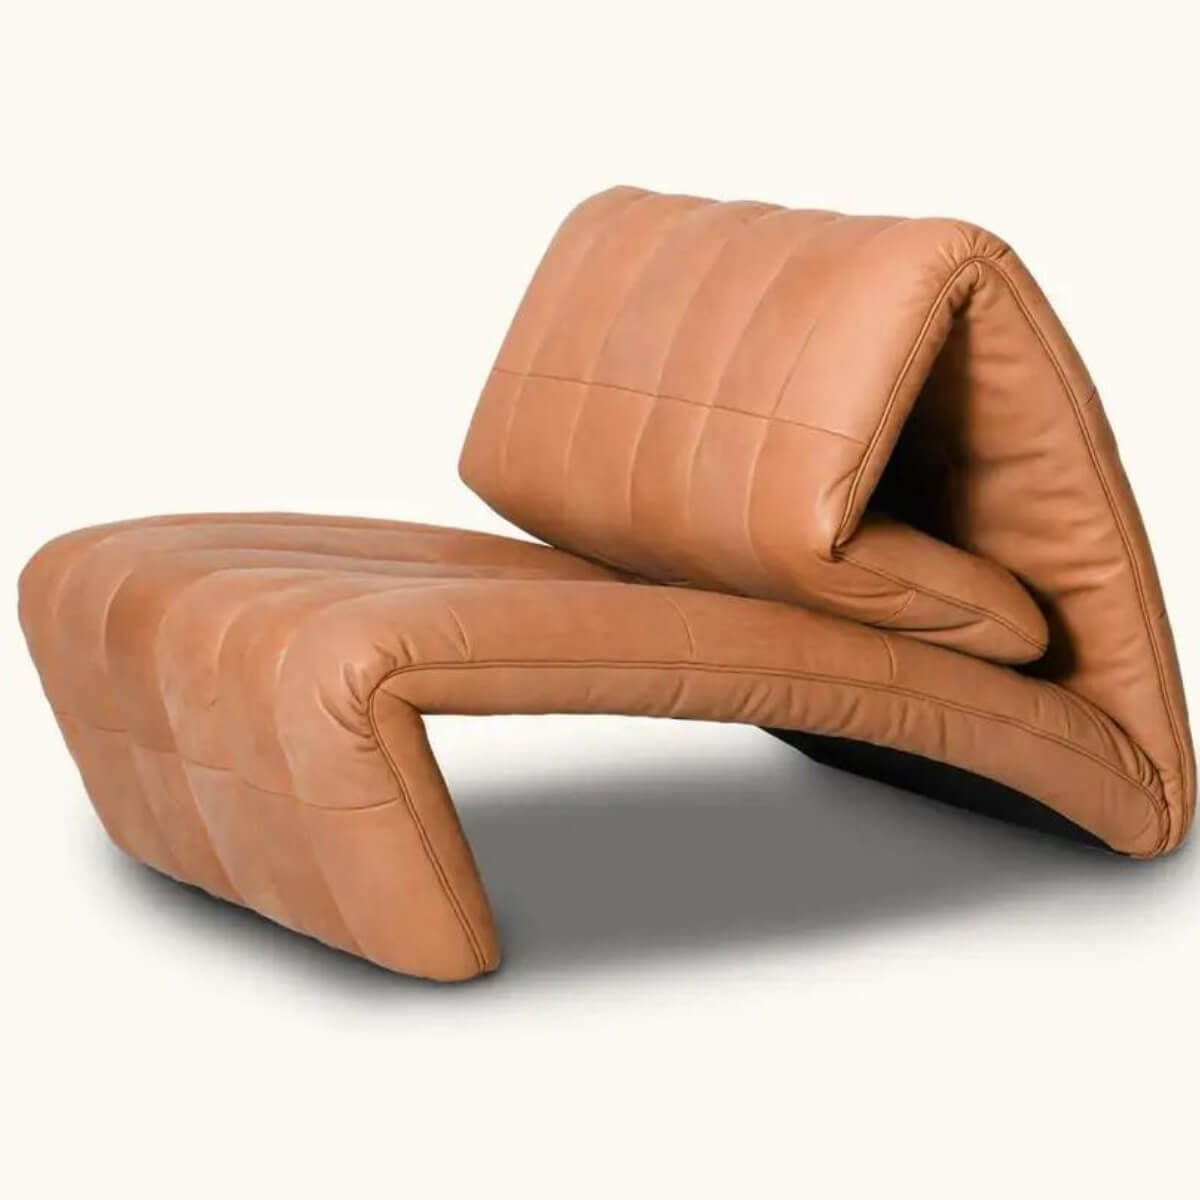 desede-leather-arm-chair-in-Australia-5